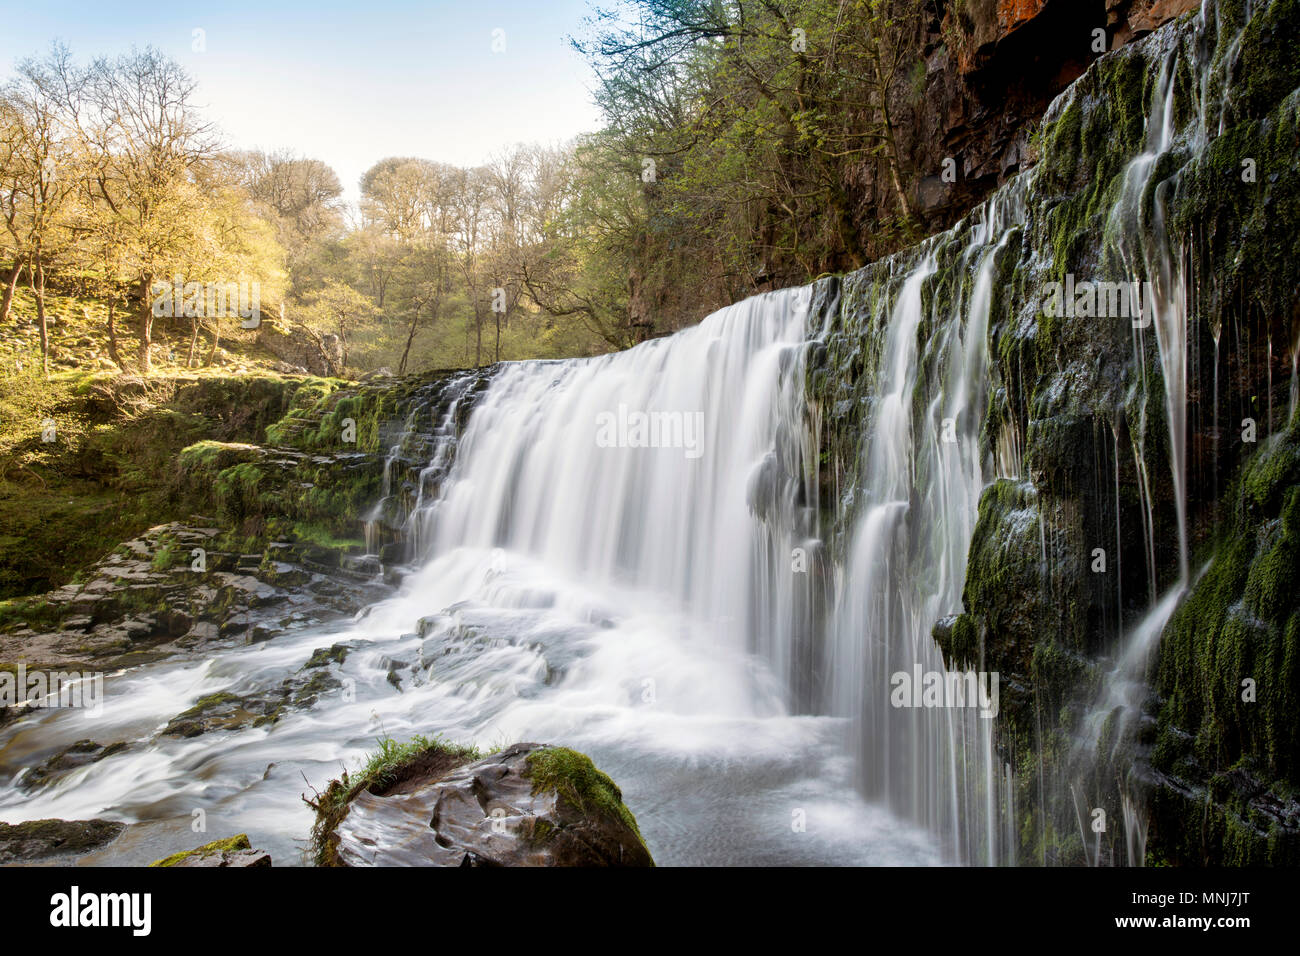 The Sgwd Isaf Clun-Gwyn (Lower Fall of the white Meadow) waterfall on the River Mellte near Ystradfellte in Powys, Wales Stock Photo